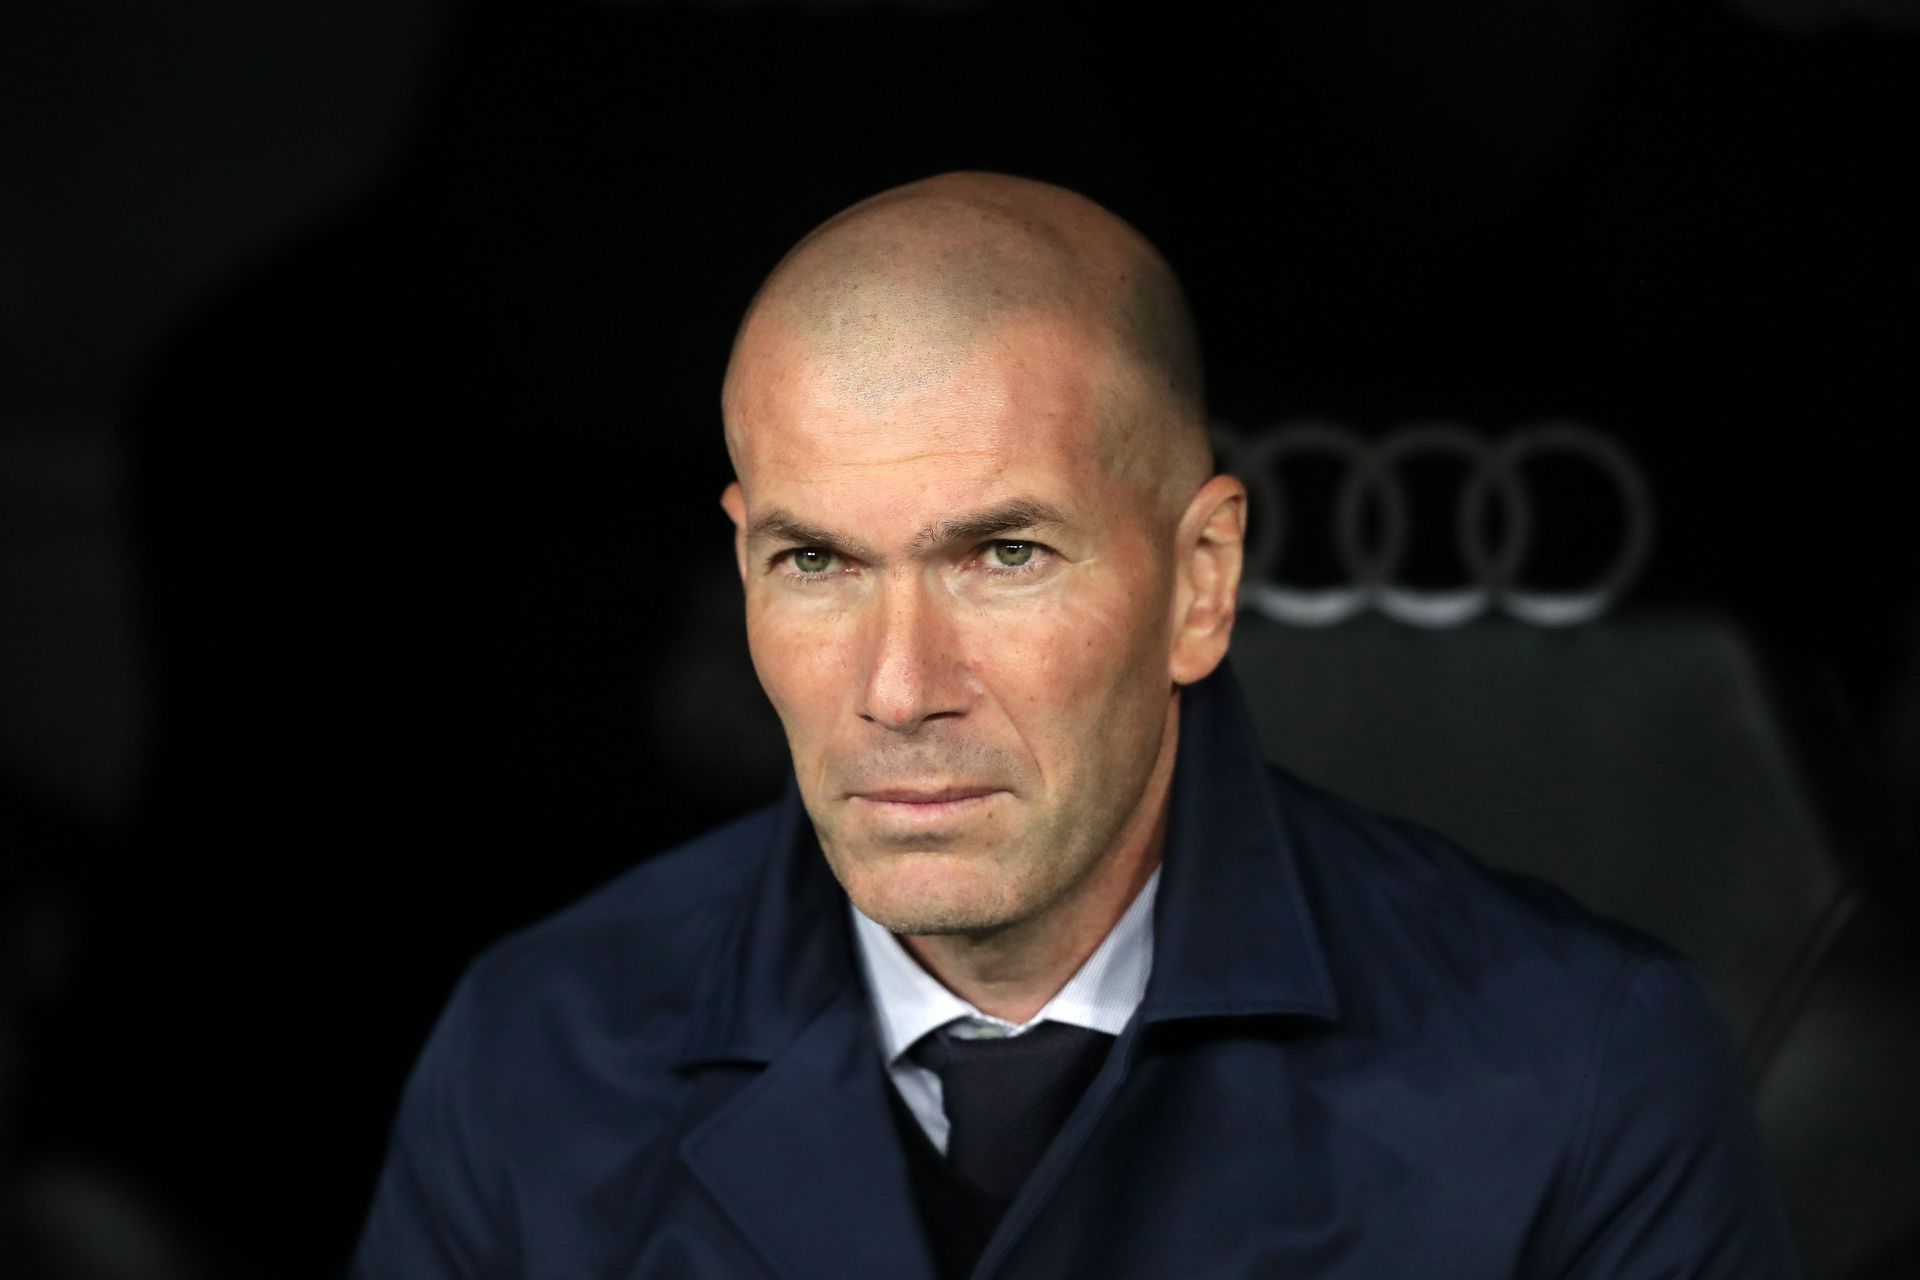 Zidane has been out of job for more than a year.